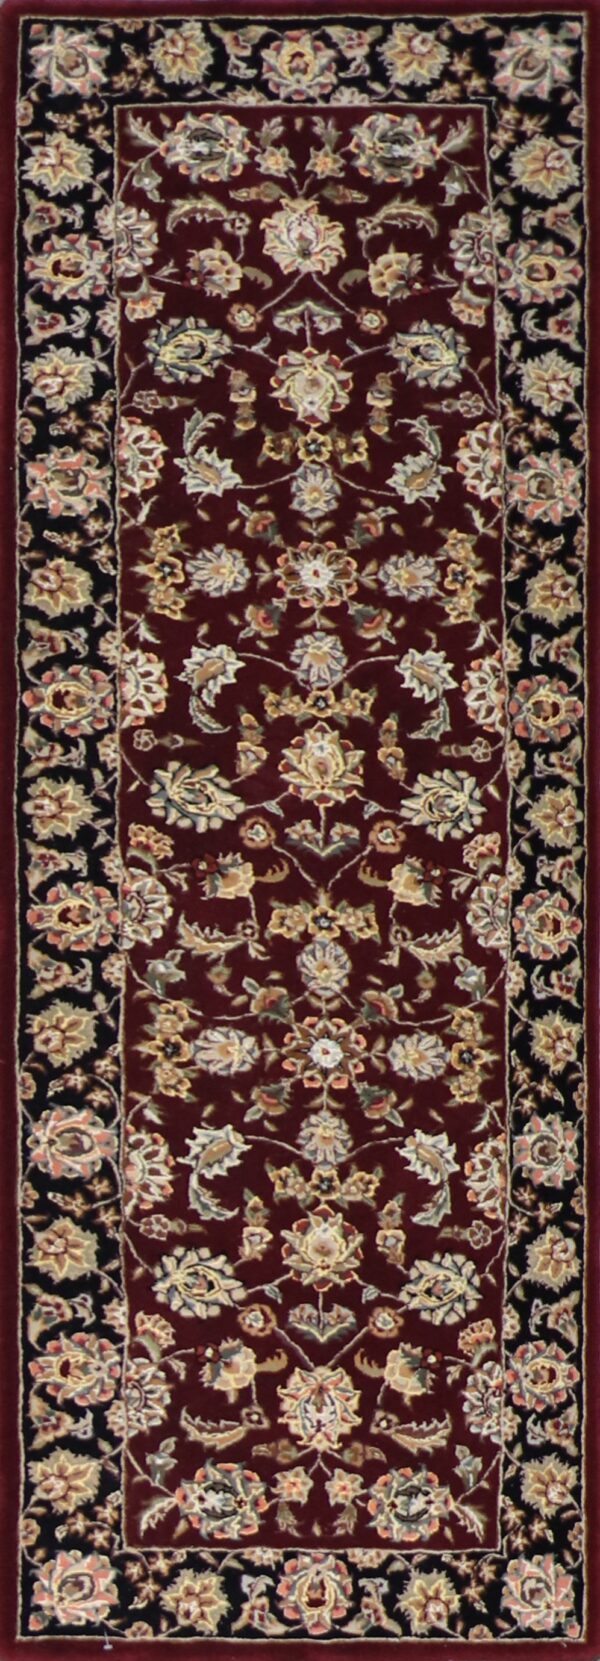 2'7"x7'11" Decorative Burgundy Wool & Silk Hand-Tufted Rug - Direct Rug Import | Rugs in Chicago, Indiana,South Bend,Granger